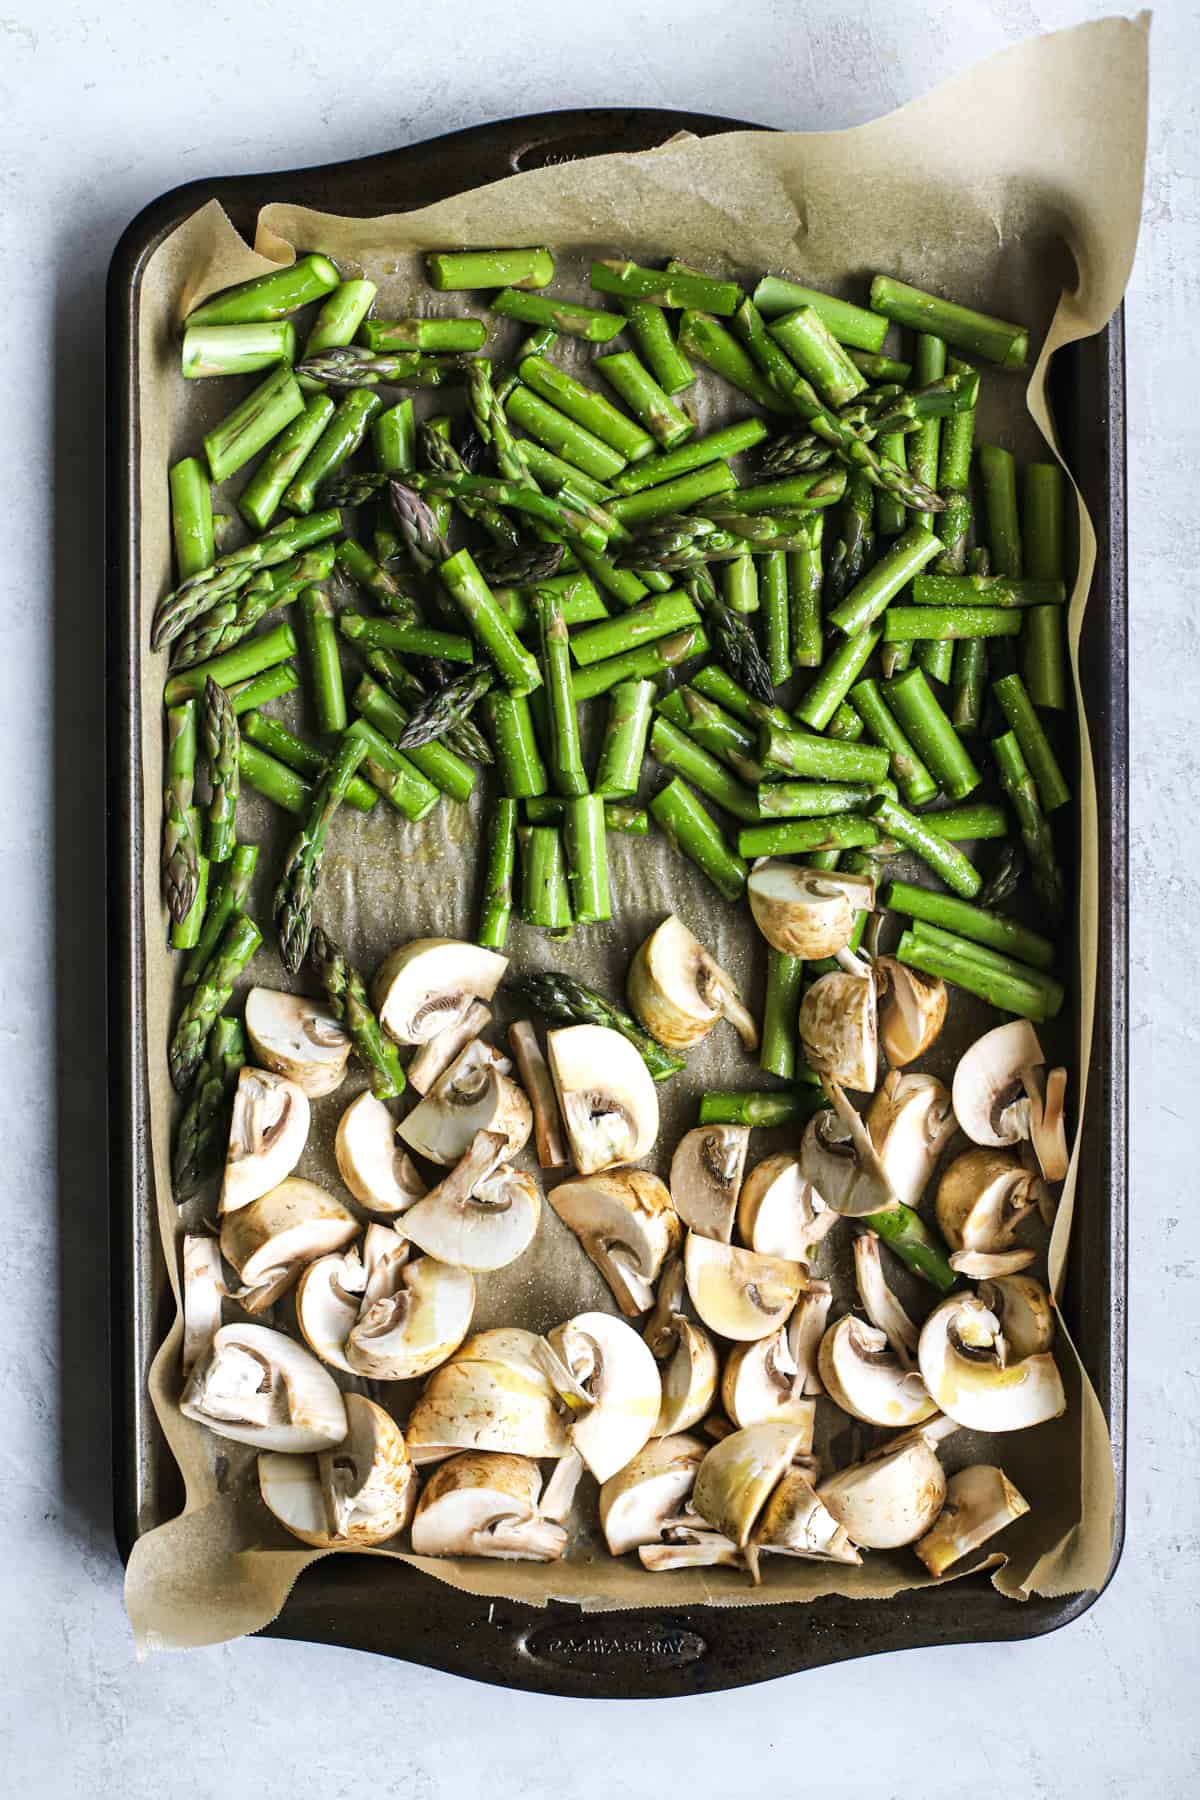 Chopped mushrooms and asparagus in olive oil and salt on parchment-lined sheet pan